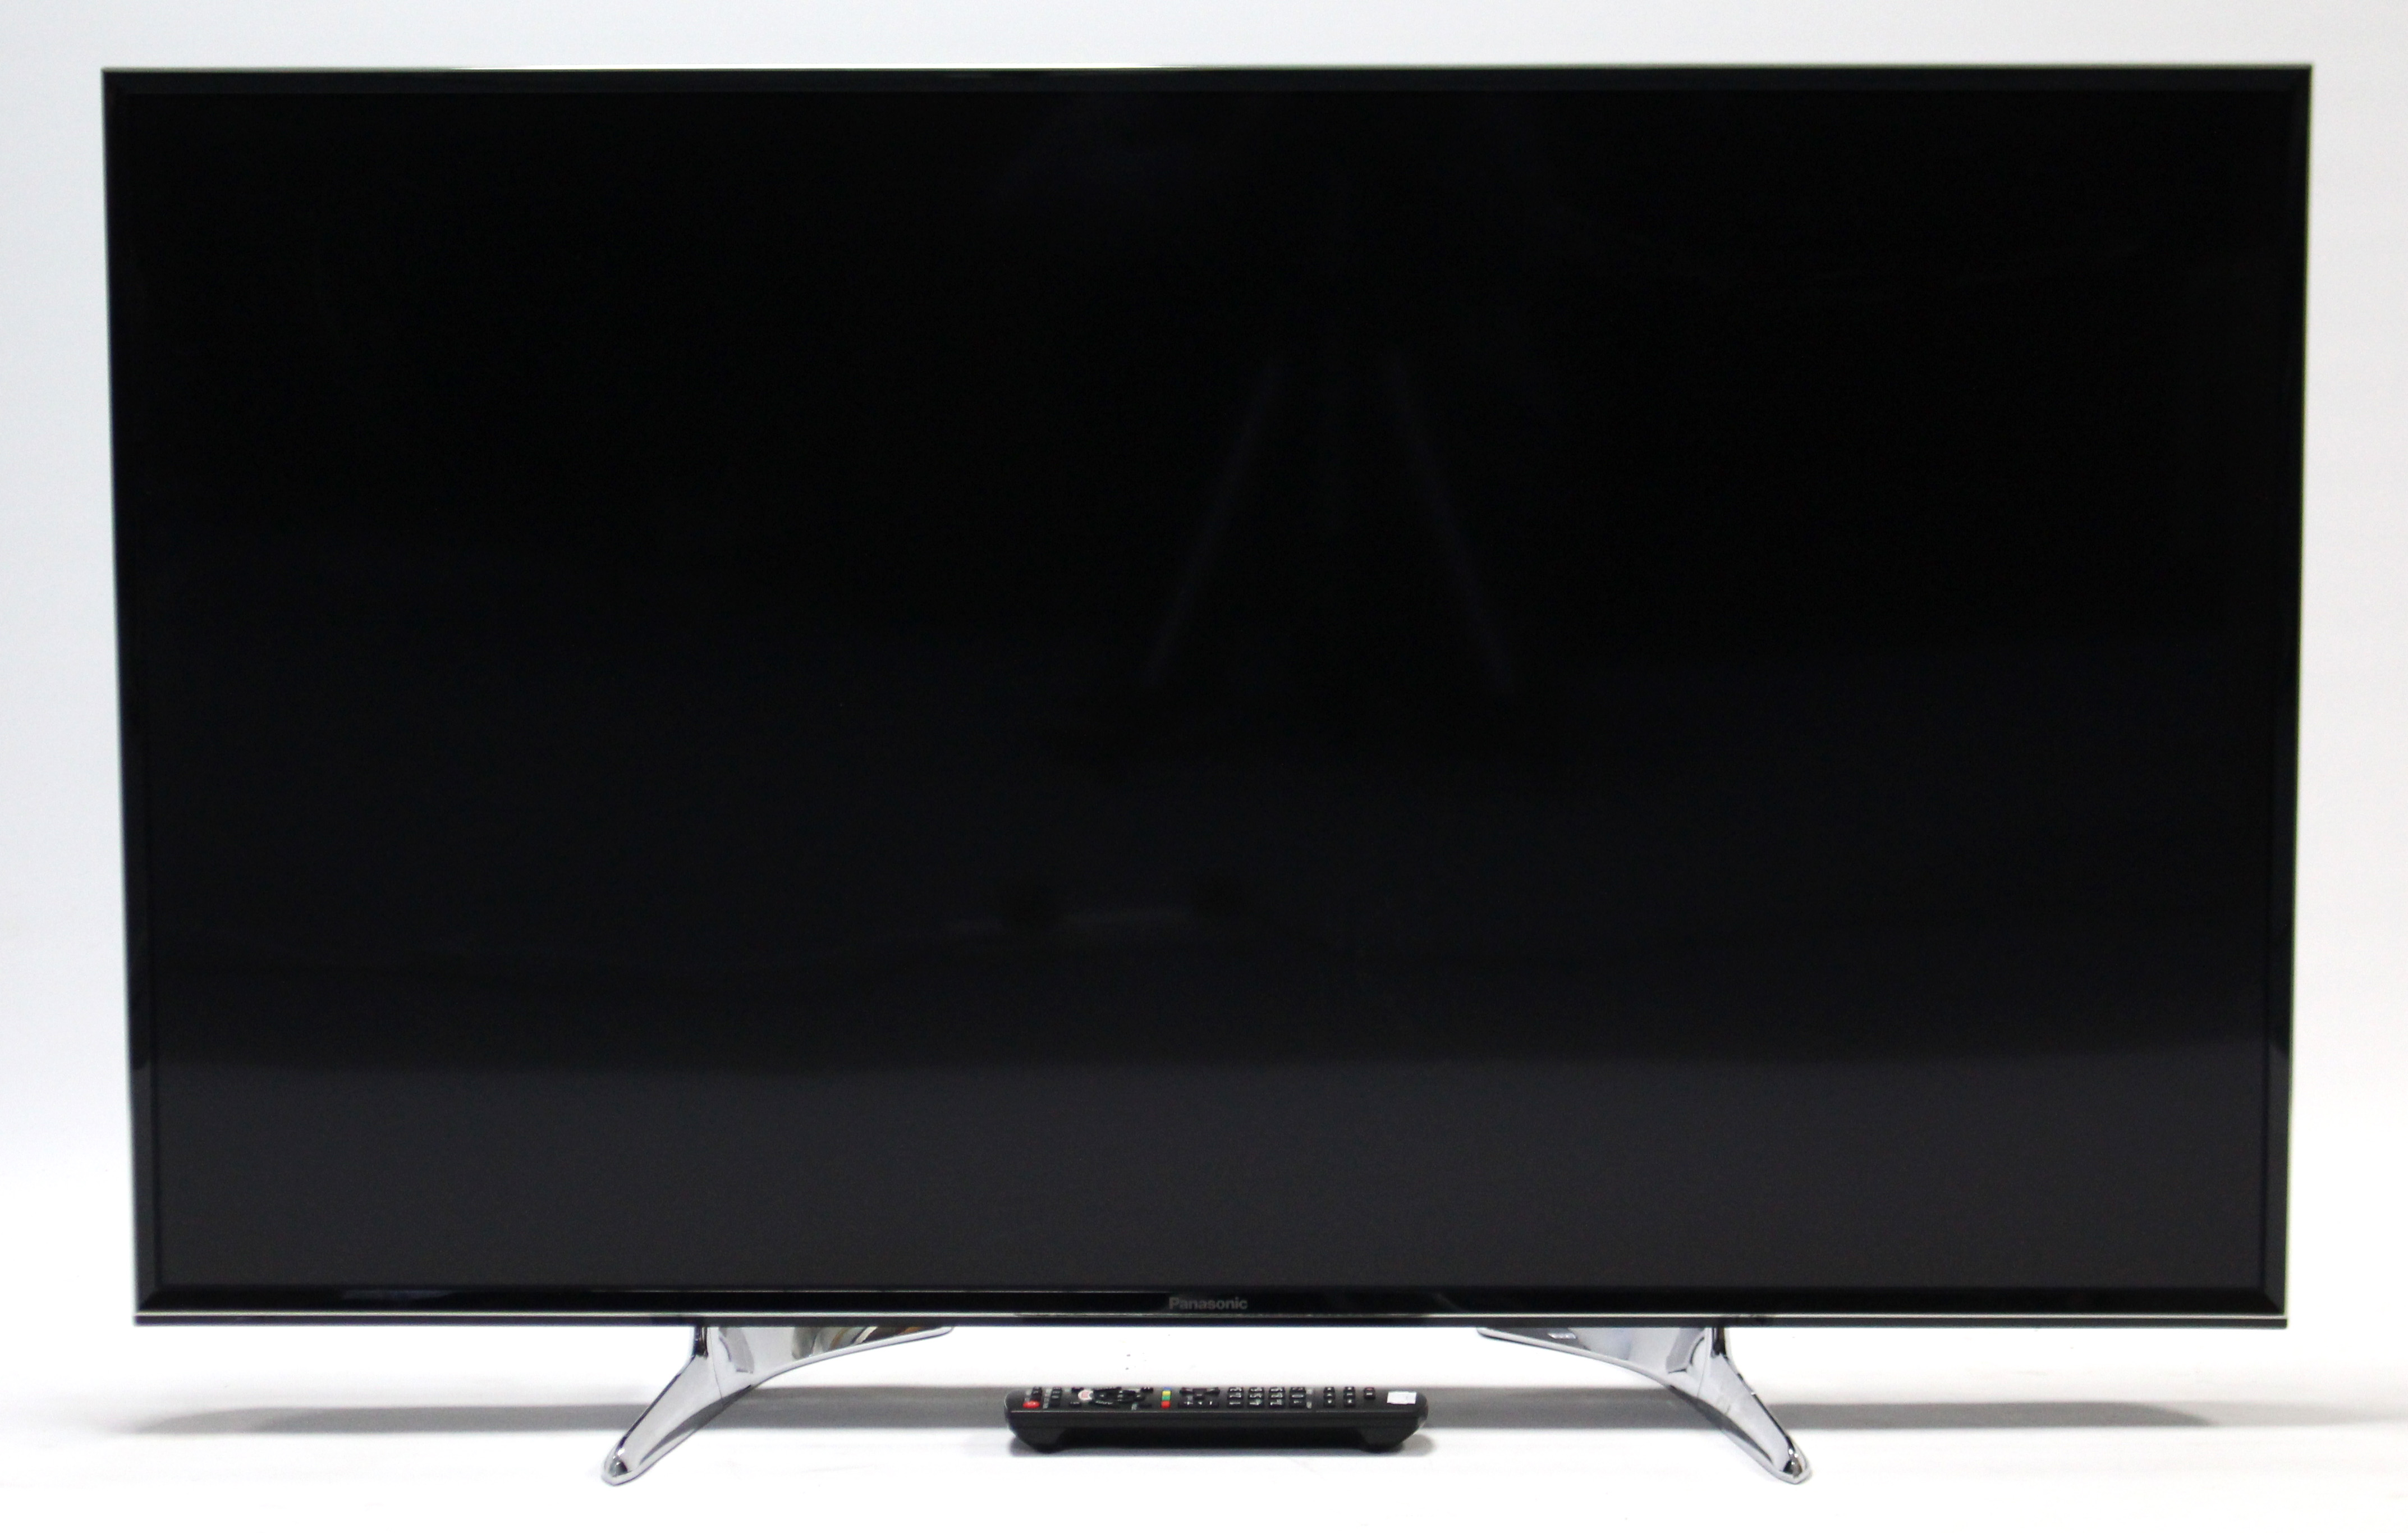 A Panasonic 48” LED television with remote control.